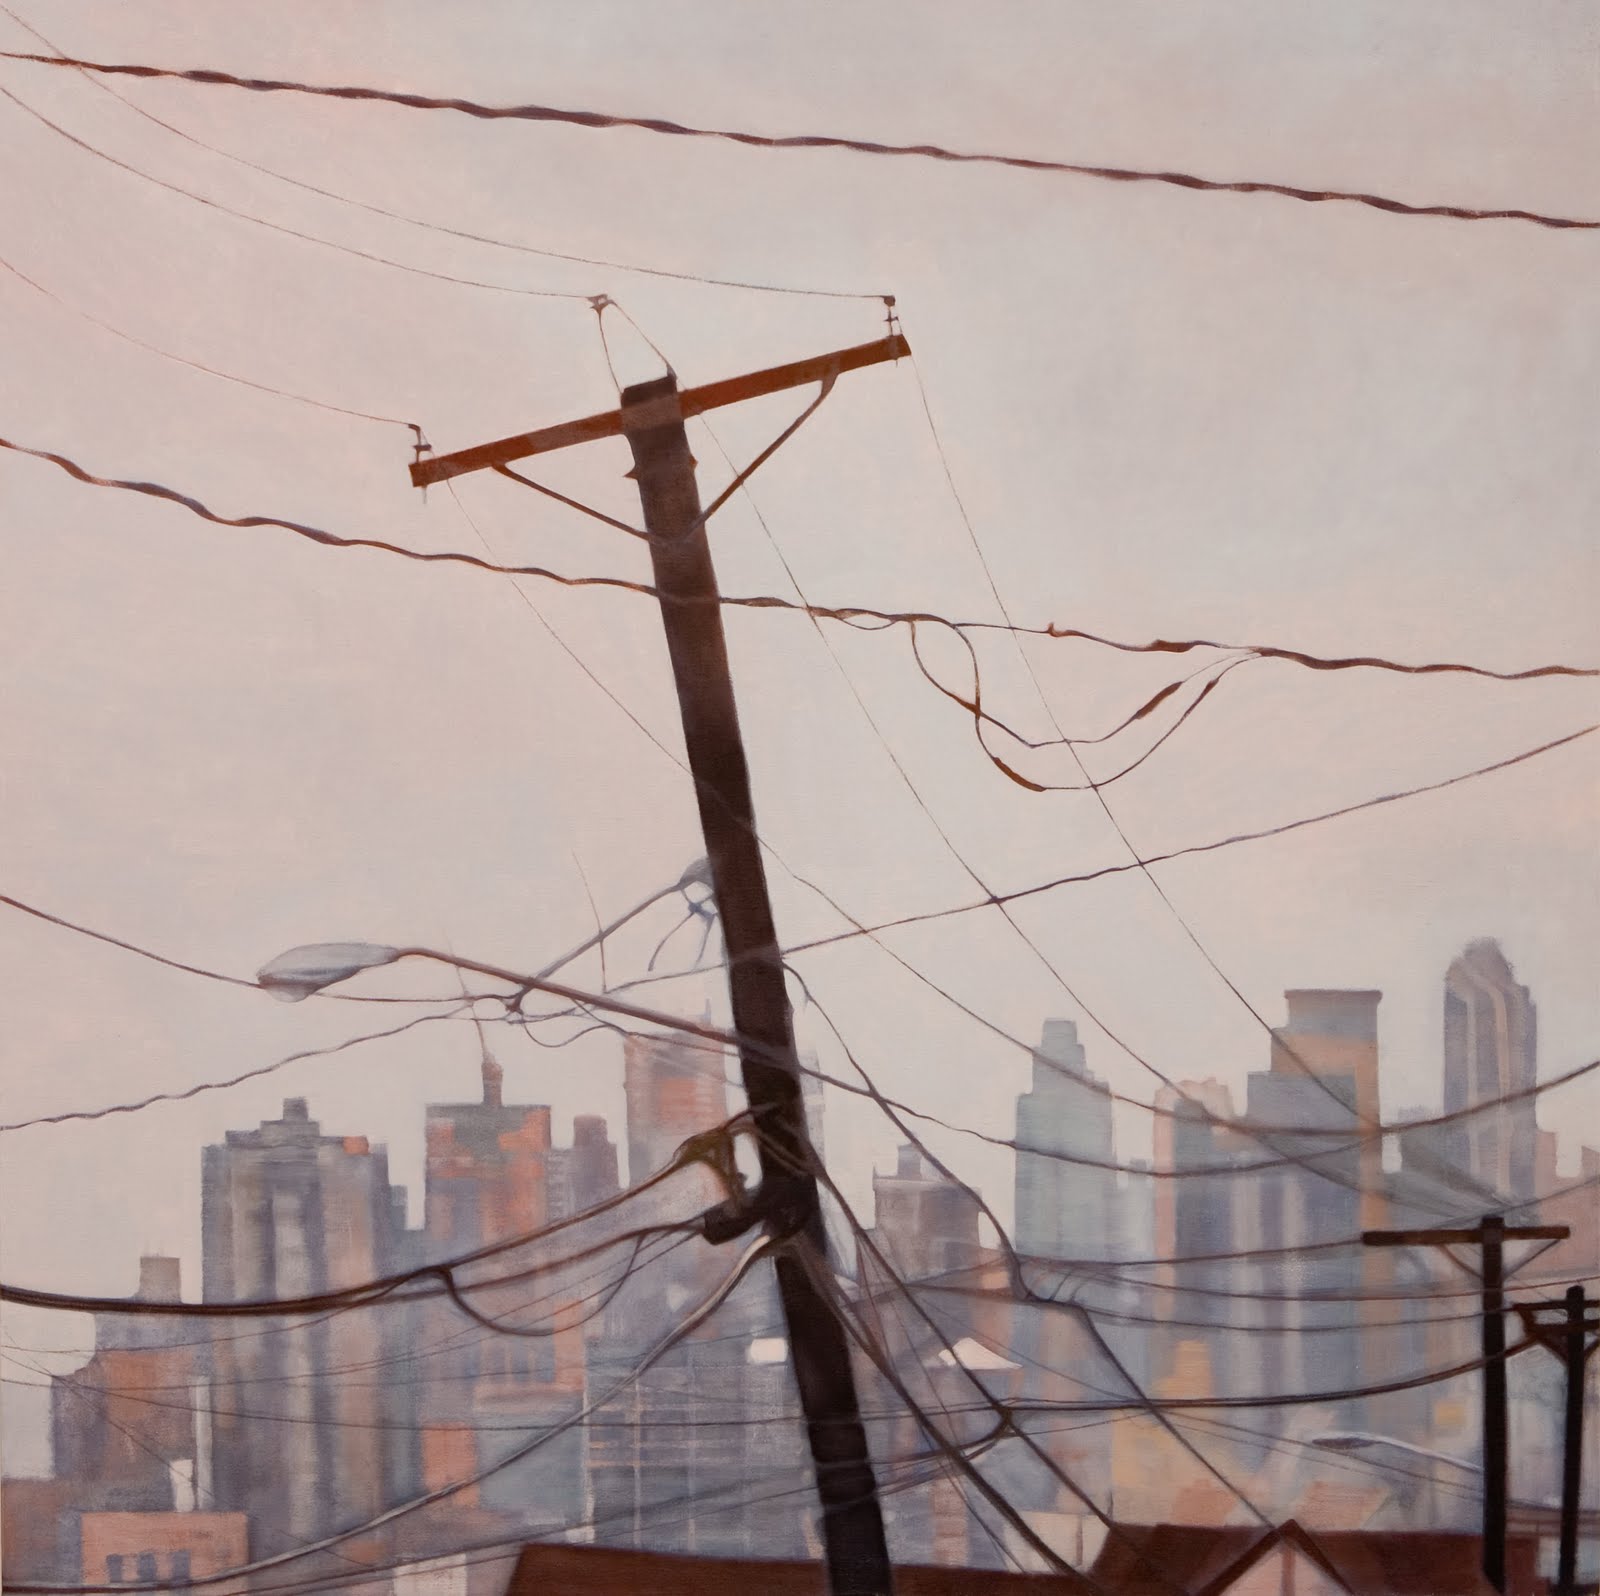 “View from Weehawken”, oil on linen, 44x44x2.5 in.